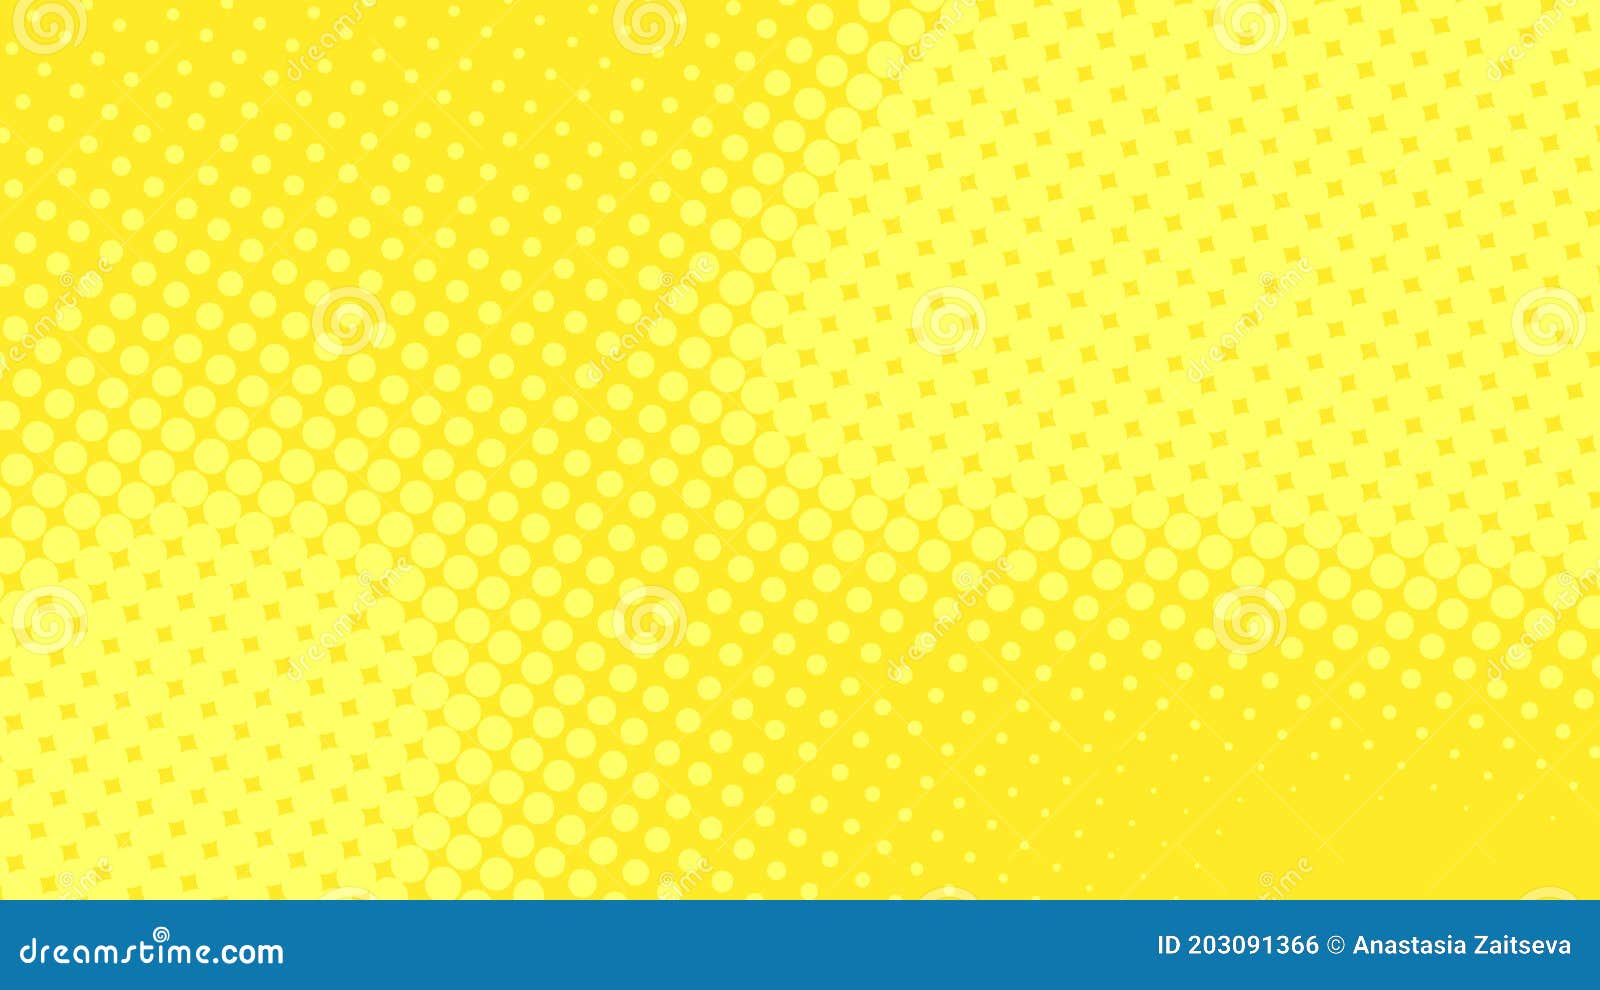 modern yellow pop art background with halftone dots desing in comic style,   eps10